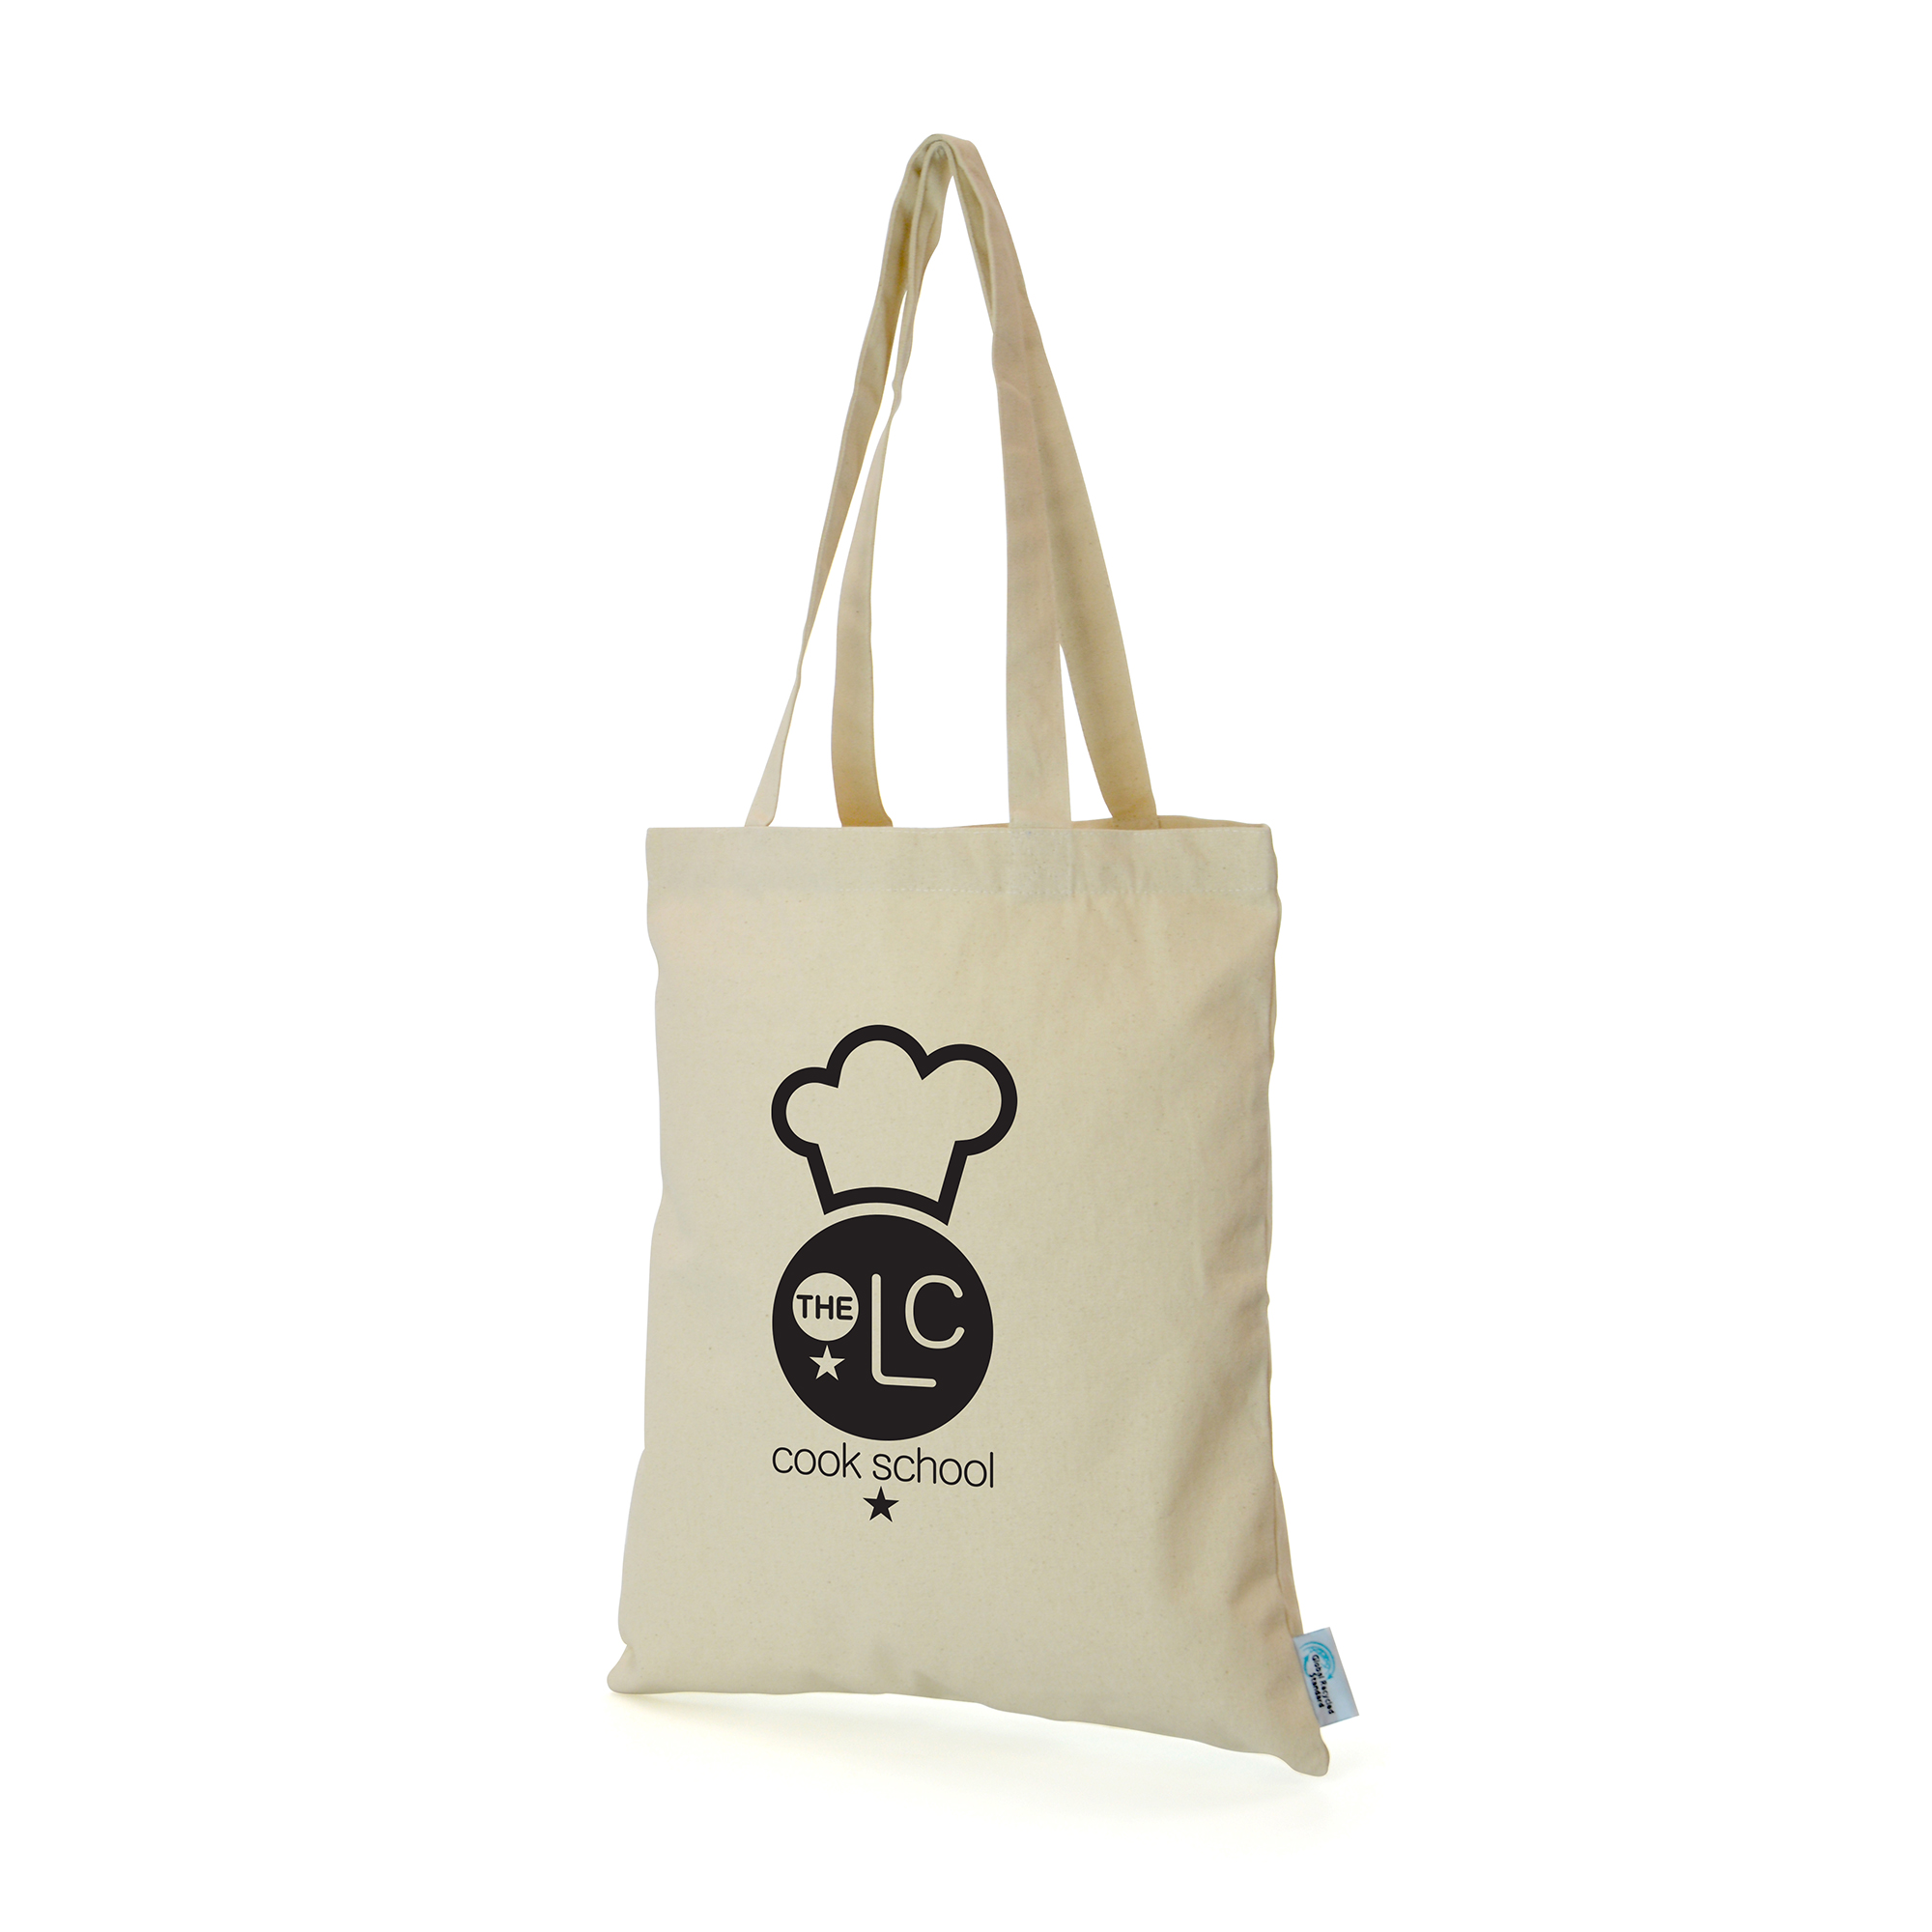 50% recycled cotton 7oz shopper with long handles and a large print area for your logo.